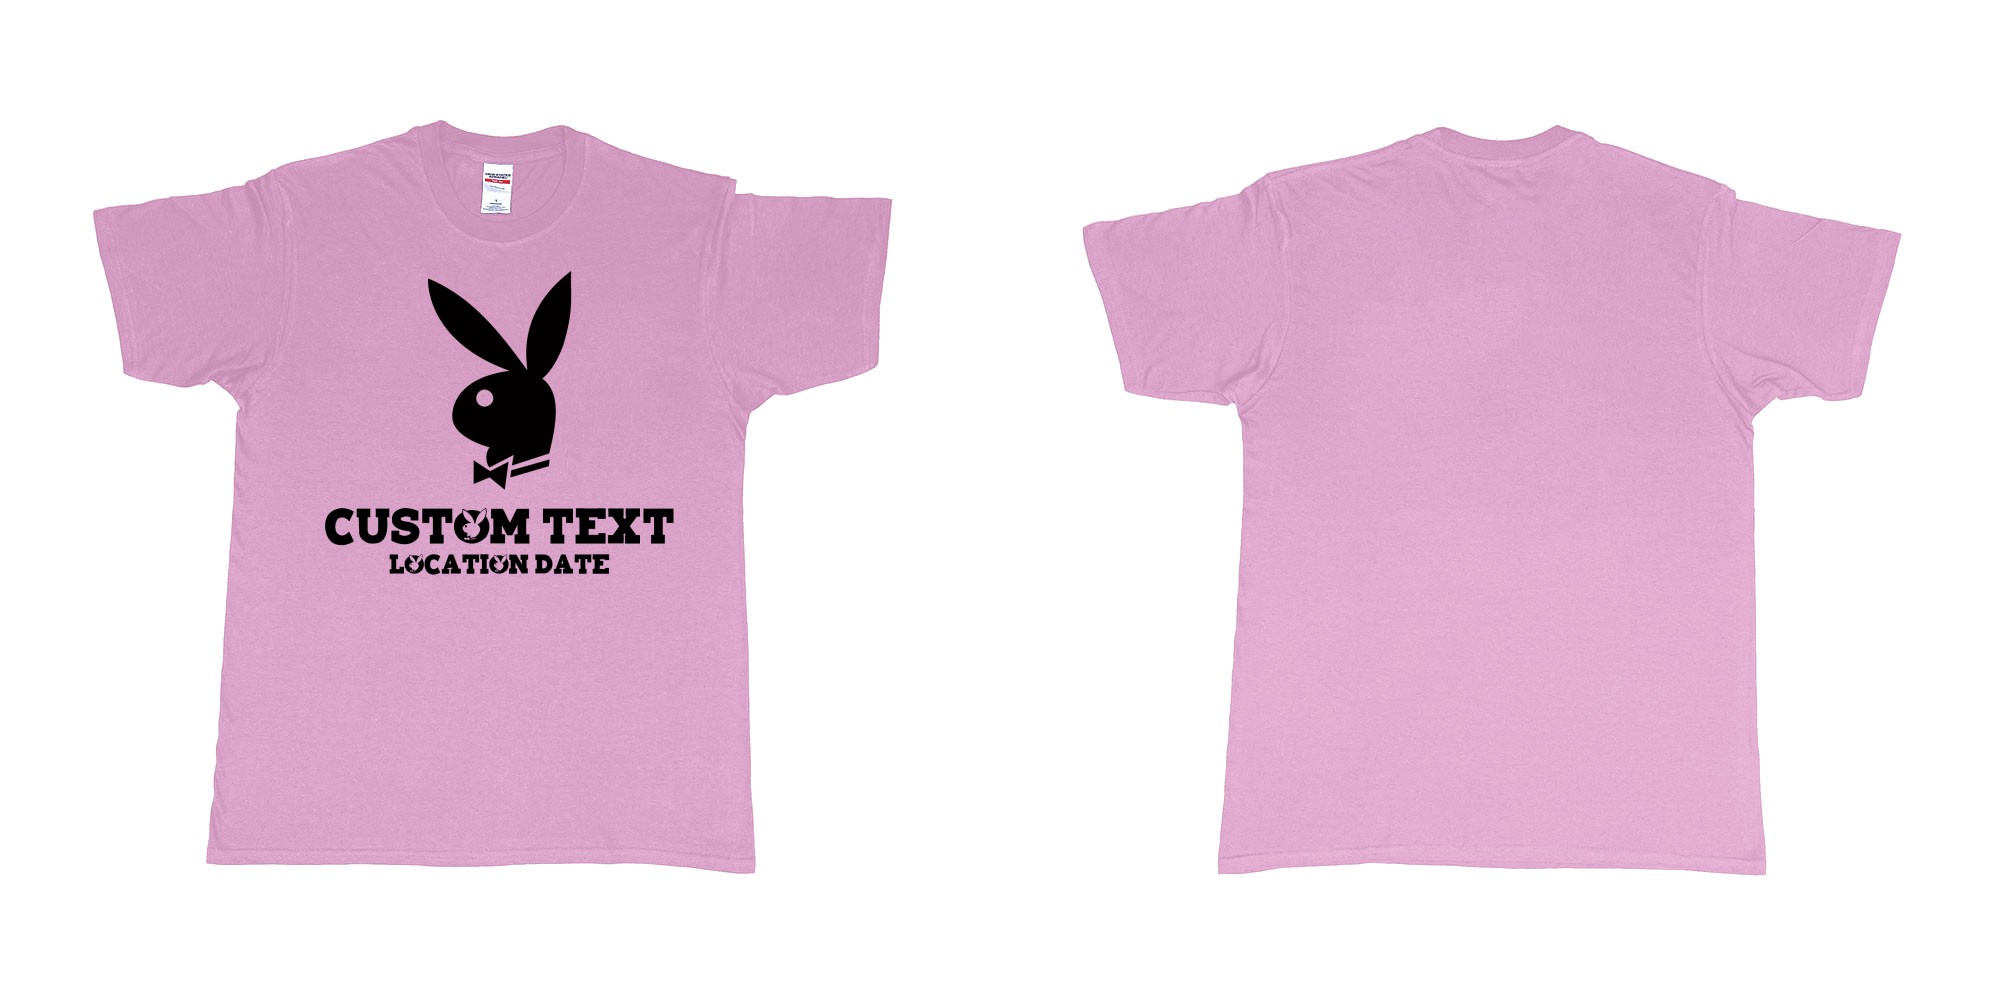 Custom tshirt design playboy playgirl custom text tshirt in fabric color light-pink choice your own text made in Bali by The Pirate Way